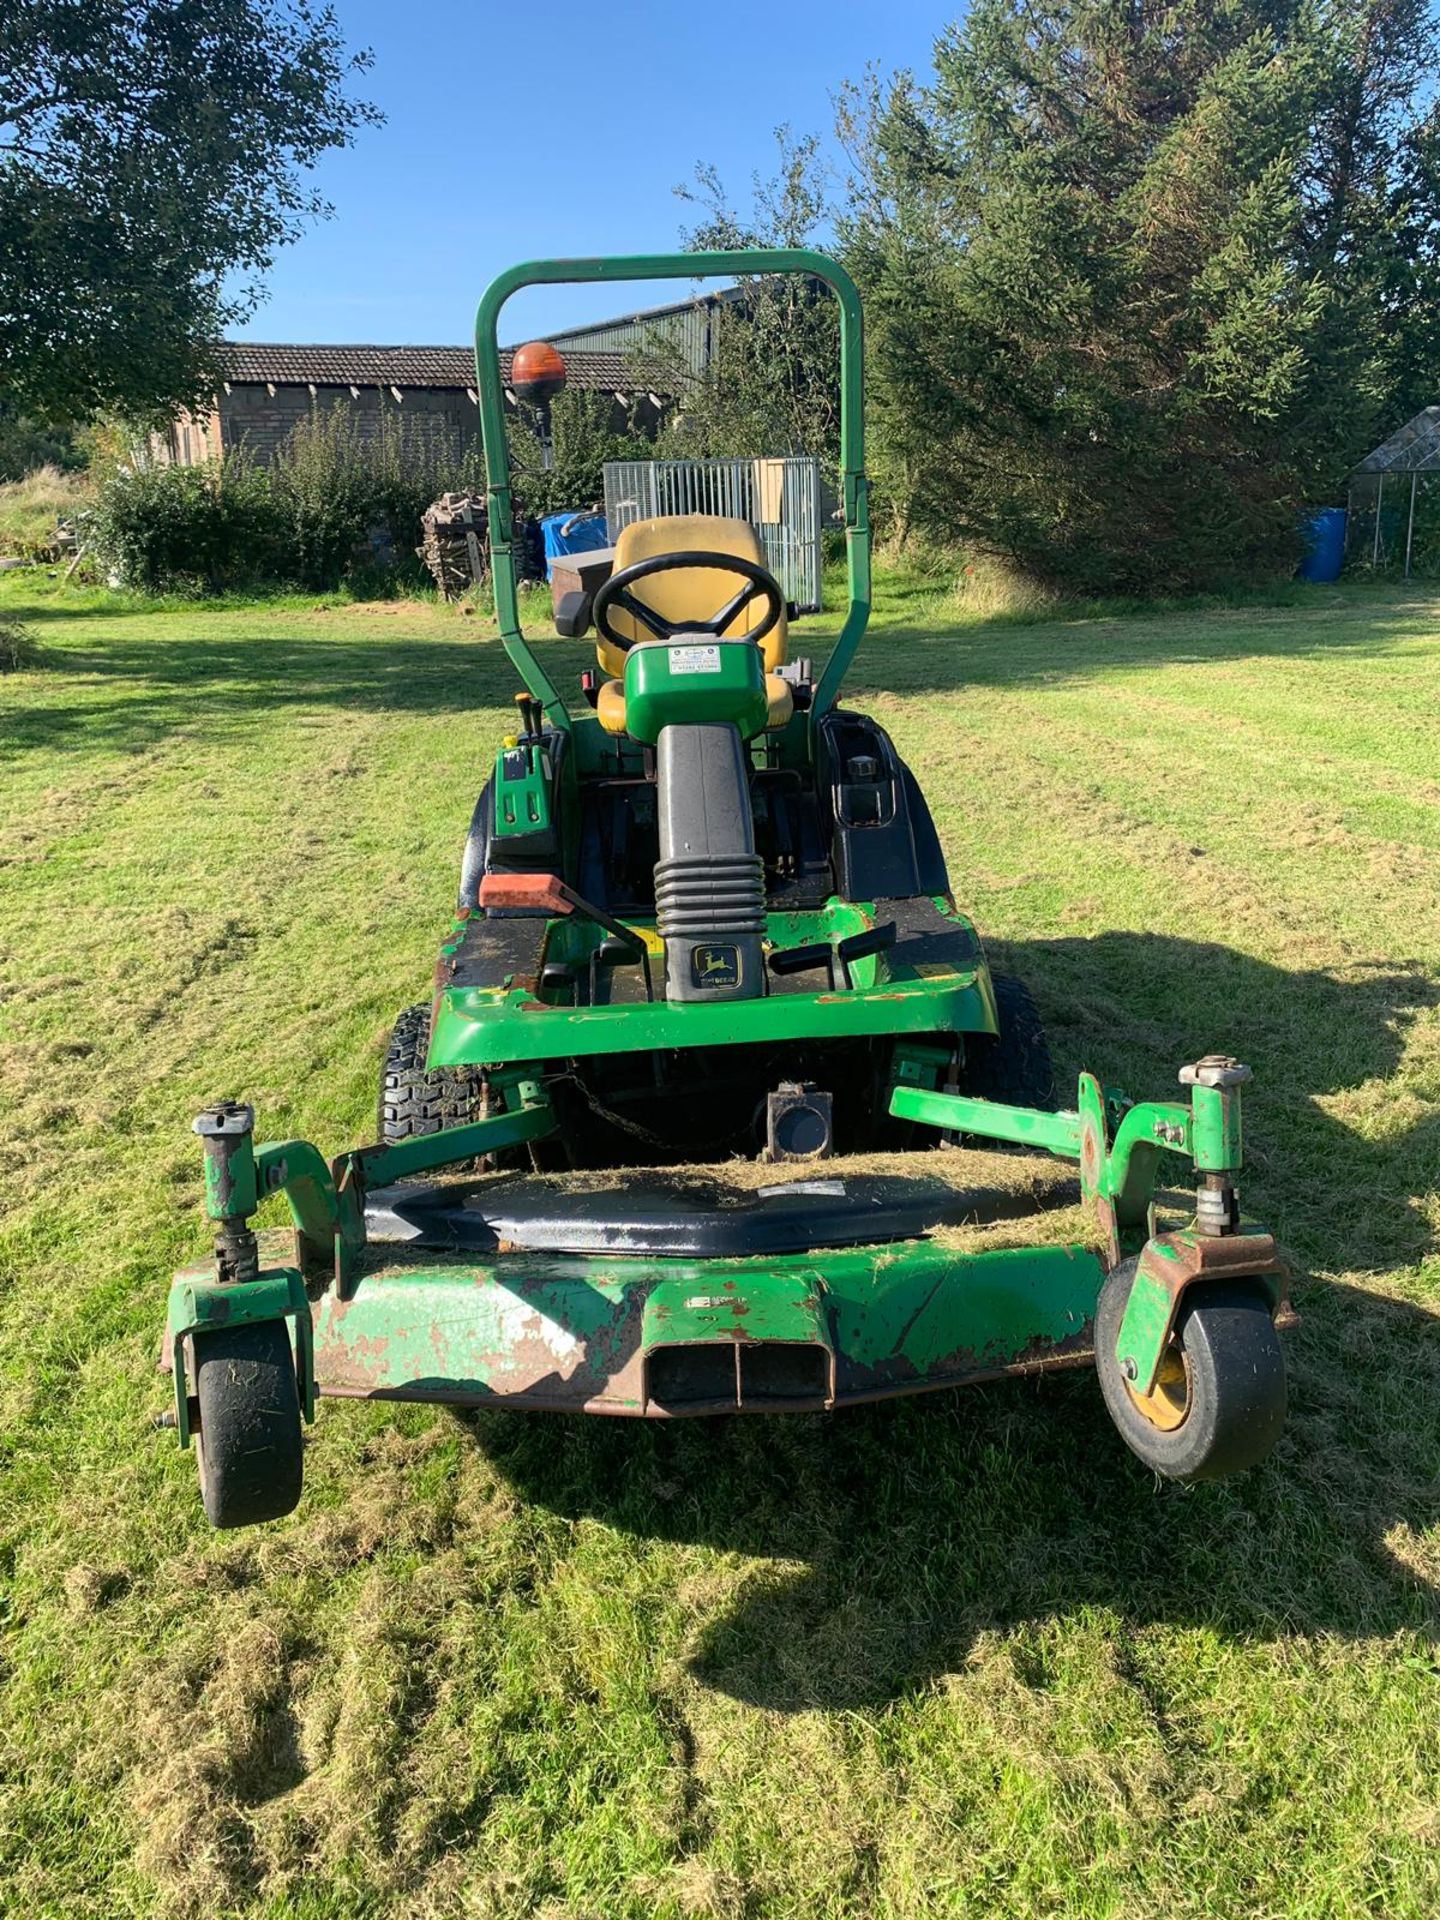 JOHN DEERE 1445 SERIES II 4WD RIDE ON DIESEL LAWN MOWER C/W OUT-FRONT ROTARY CUTTING DECK *PLUS VAT* - Image 4 of 14